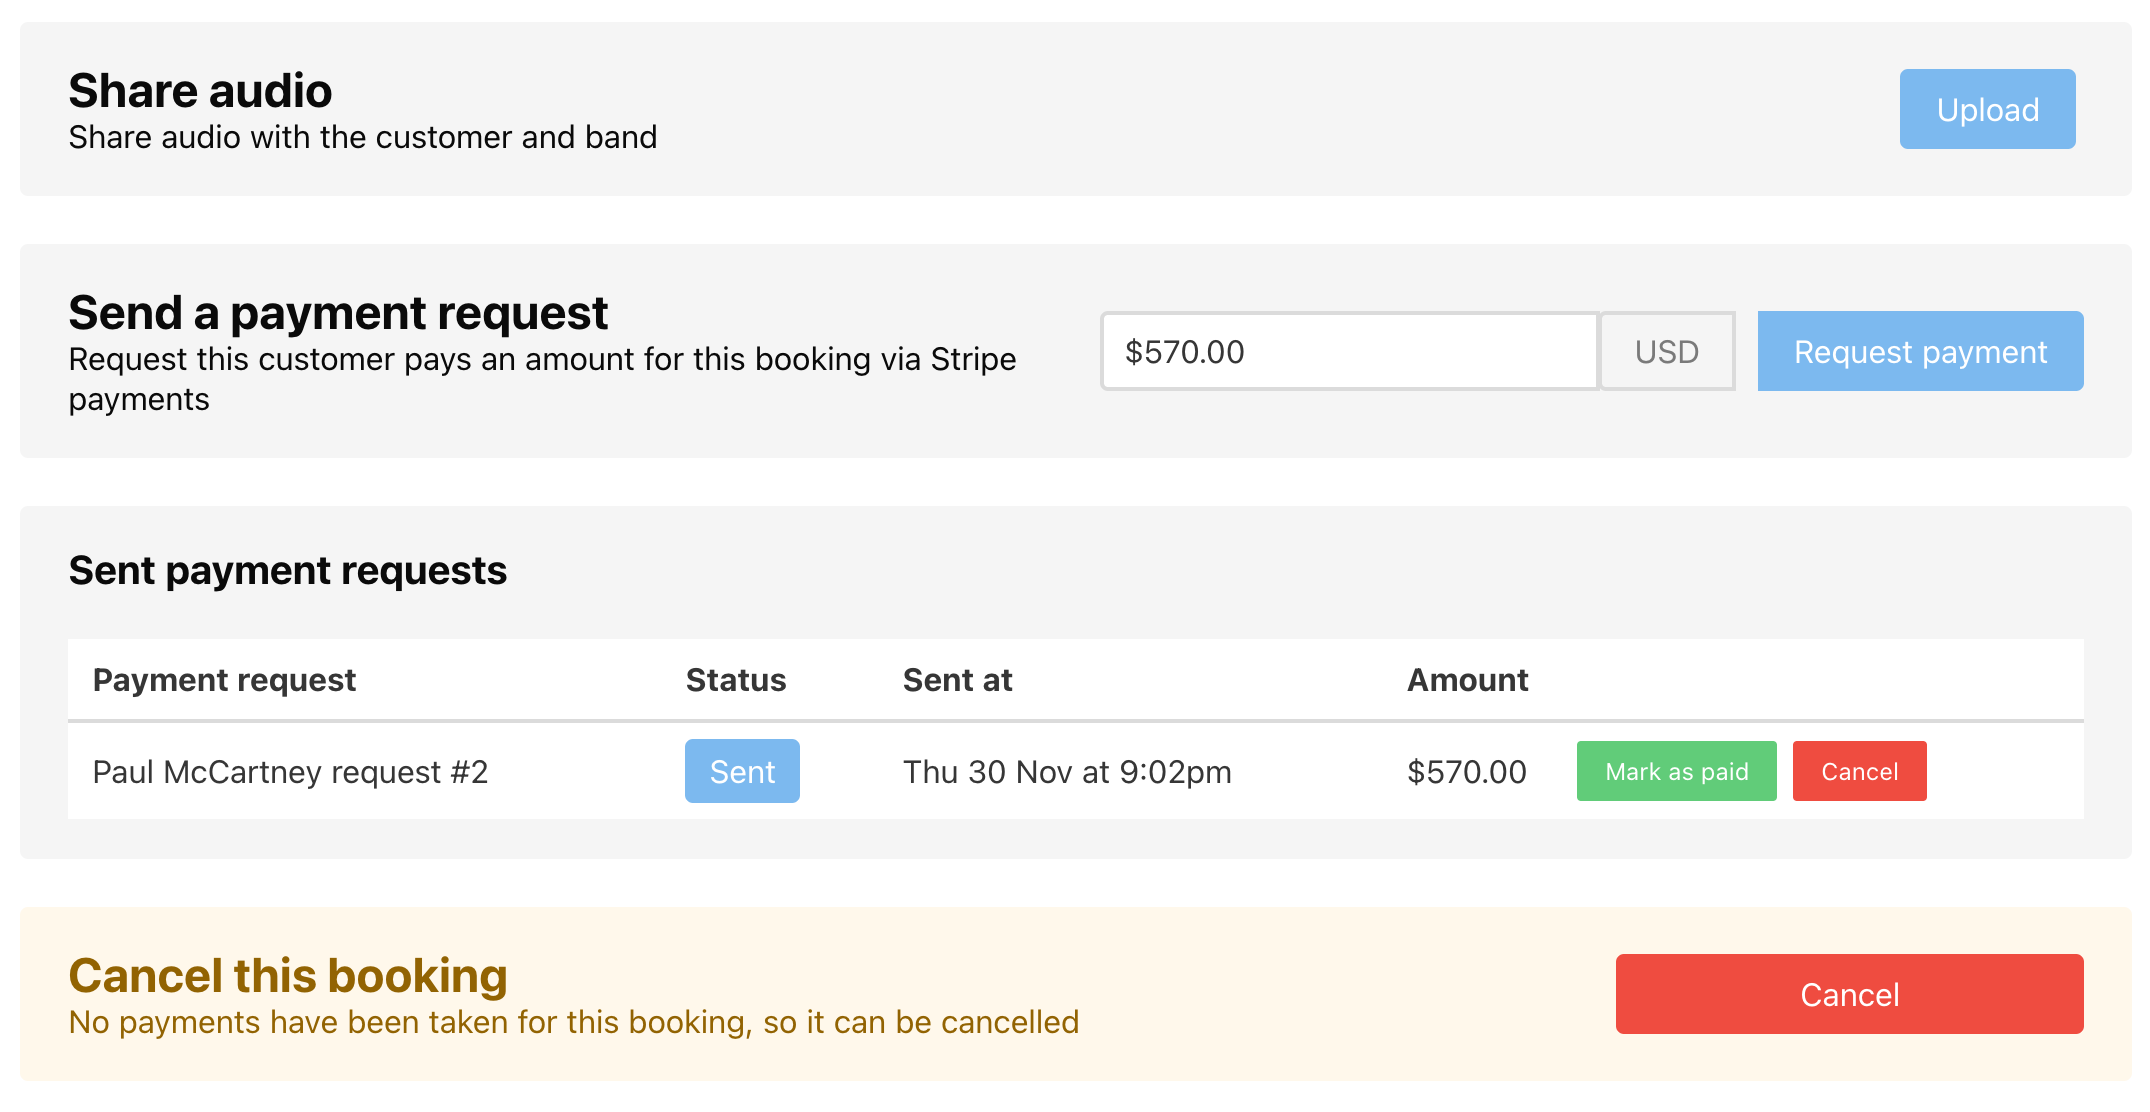 You can raise payment requests, share audio and manage booking refunds and cancellations easily